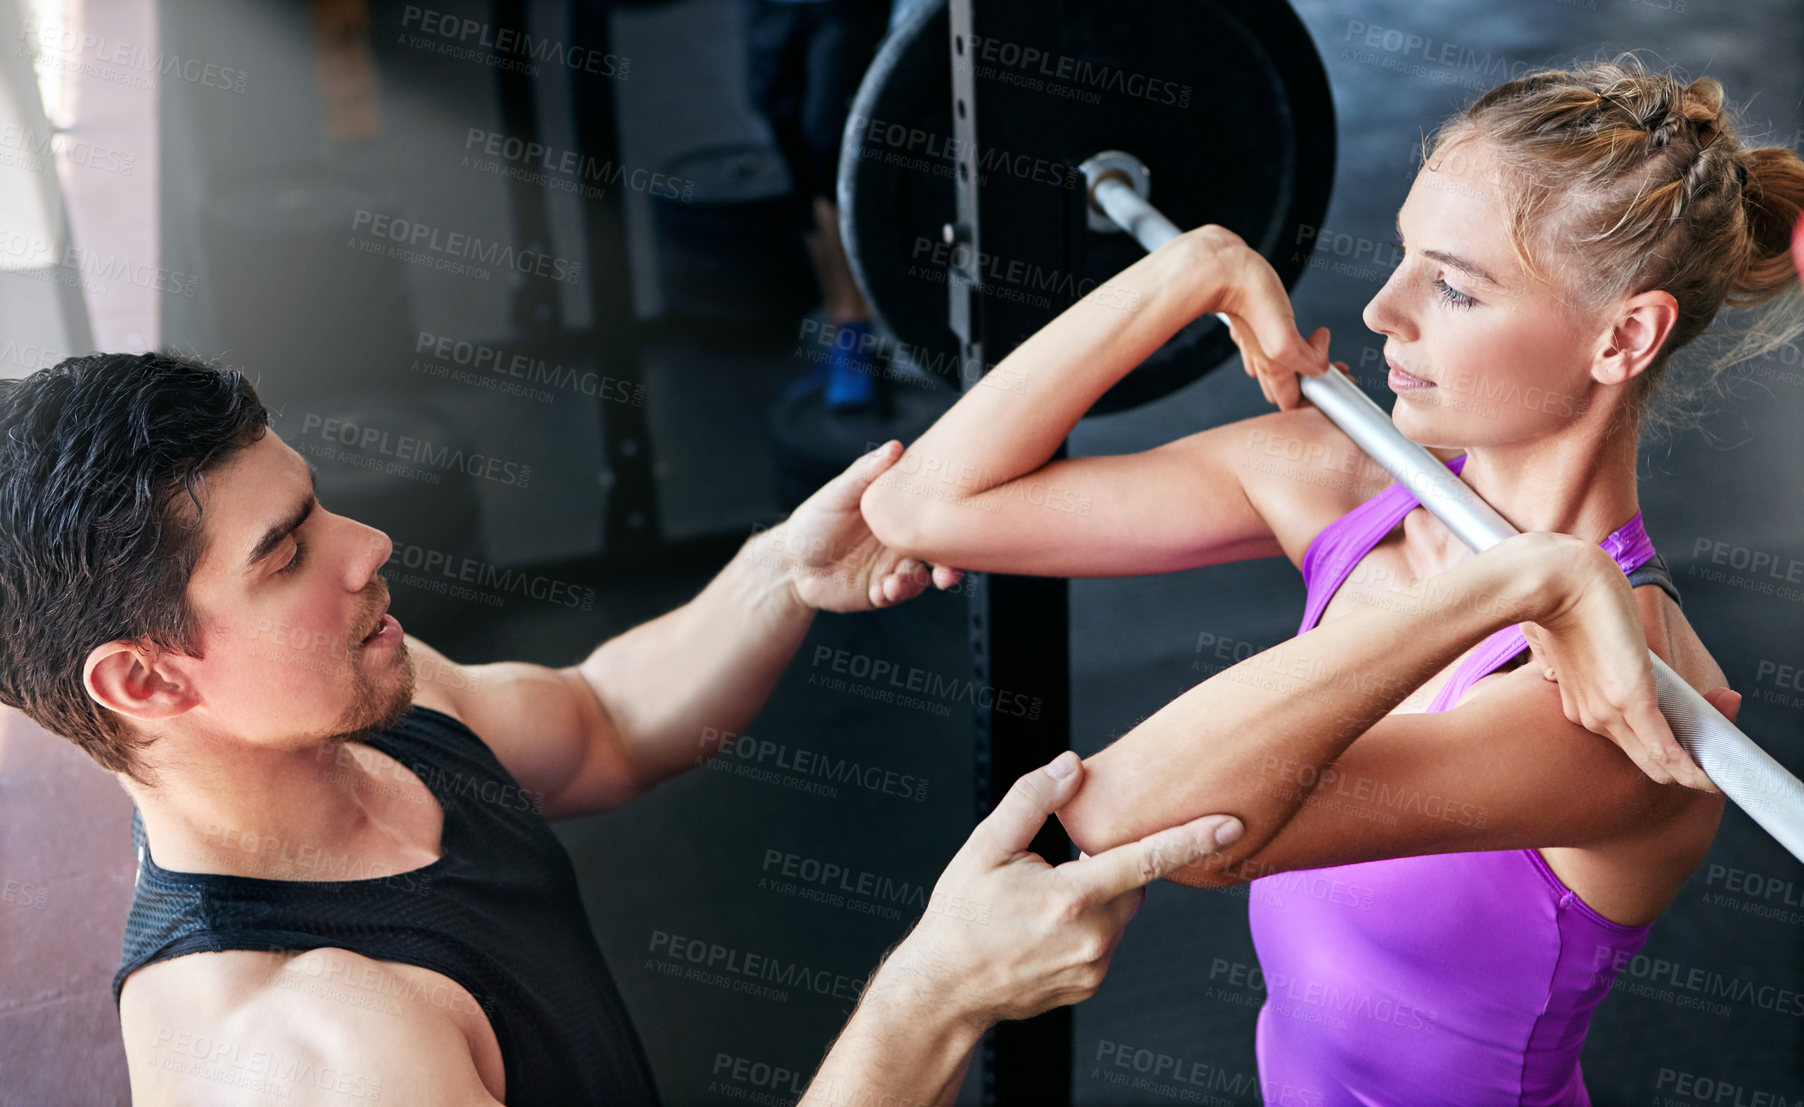 Buy stock photo Shot of a young woman lifting weights with her personal trainer assisting her